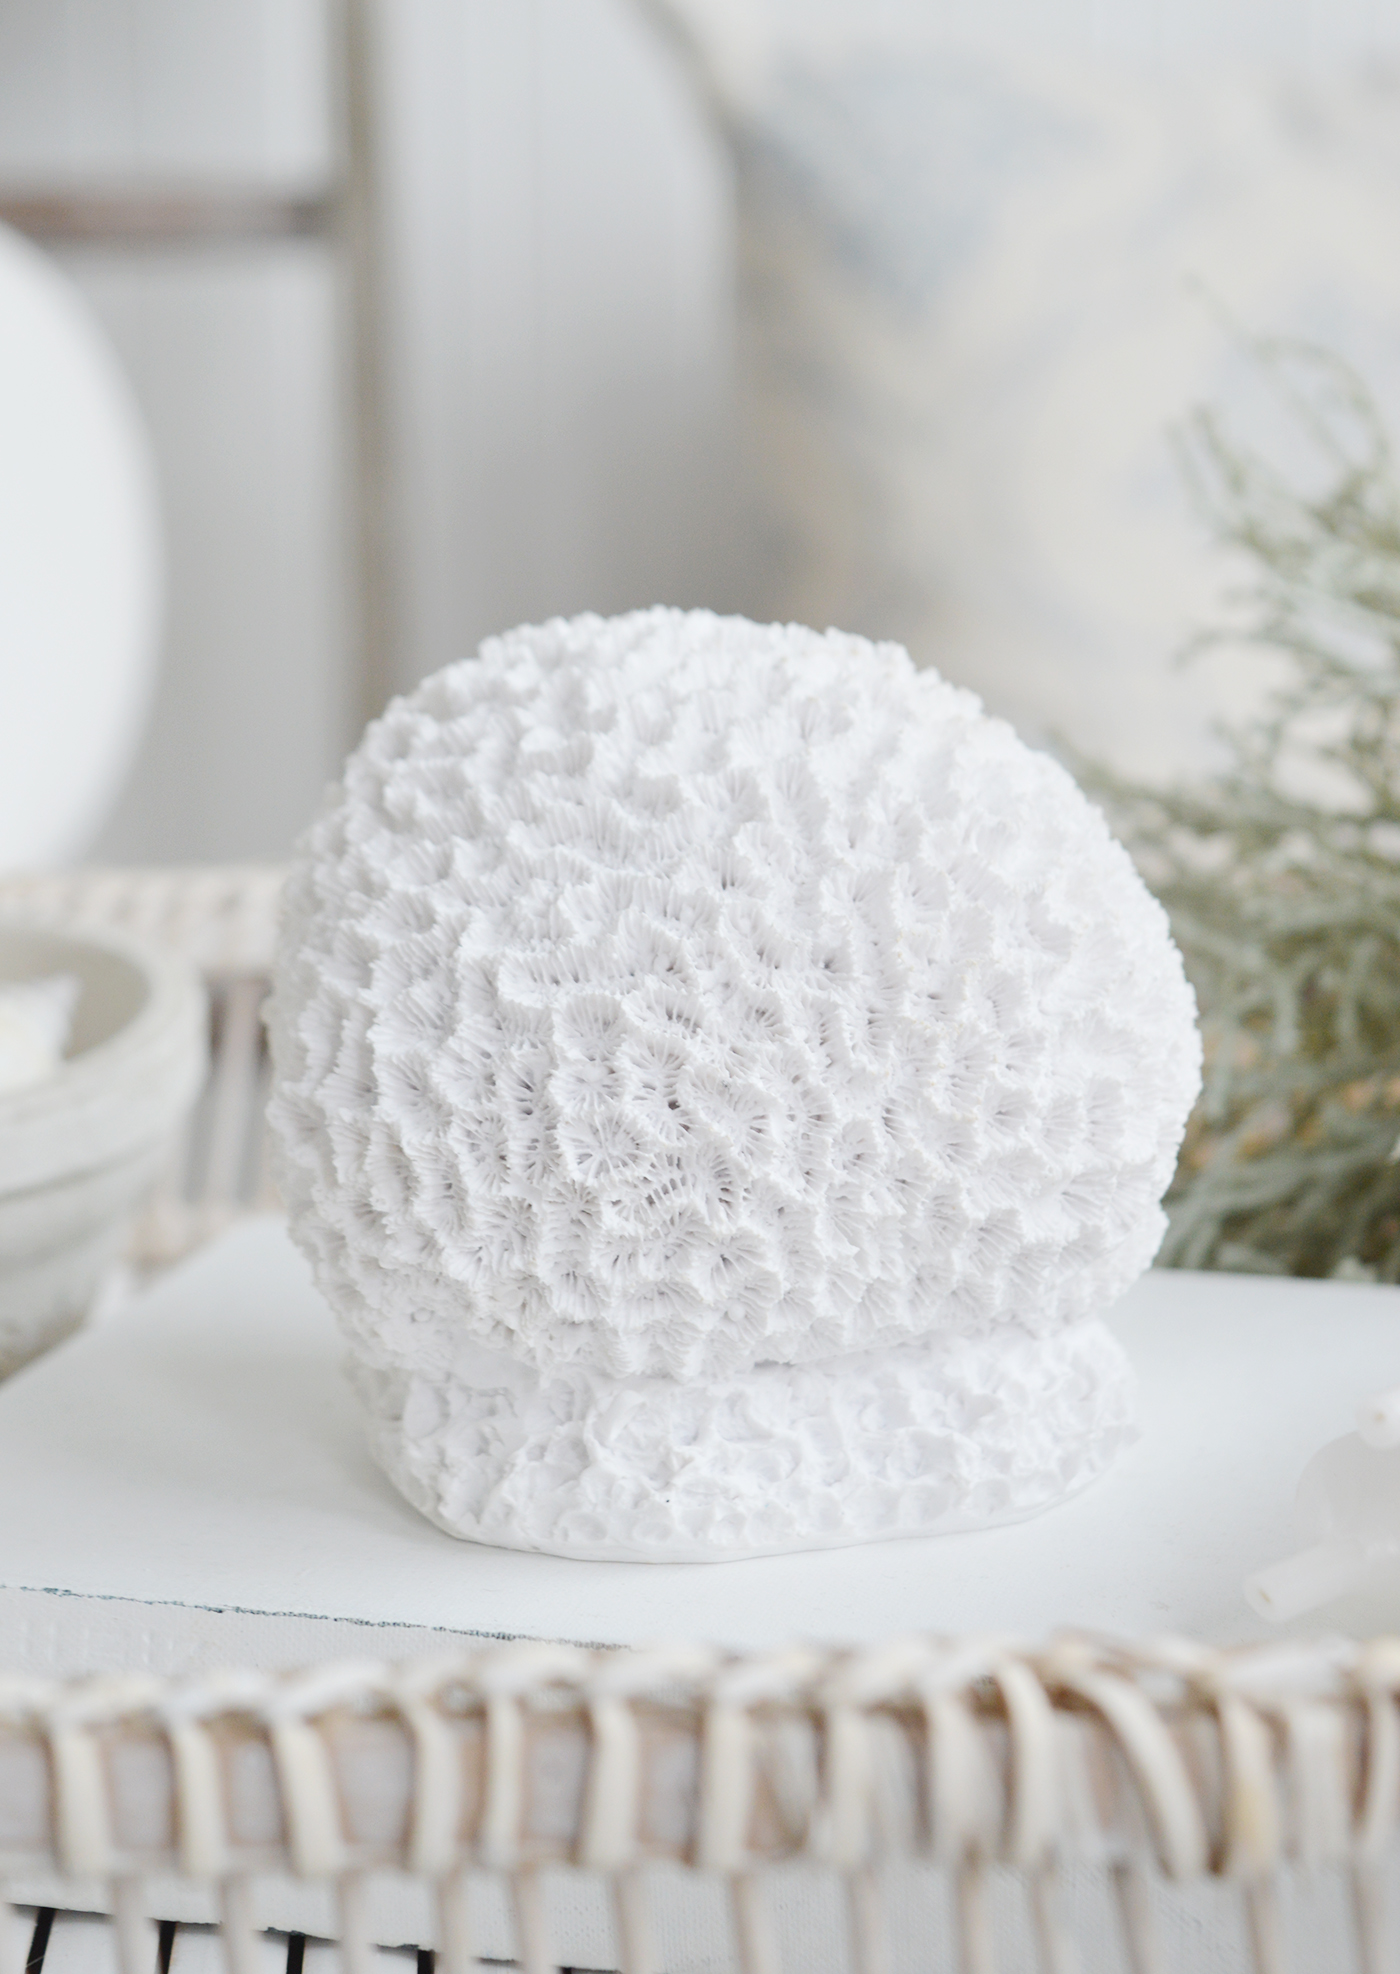 Decorative honeycomb resin faux White Coral - Coffee Table Decor Elegant Coastal New England from The White Lighthouse Home. White Furniture and home decor accessories for the home interiors. New england interiors for luxury coastal home interiors